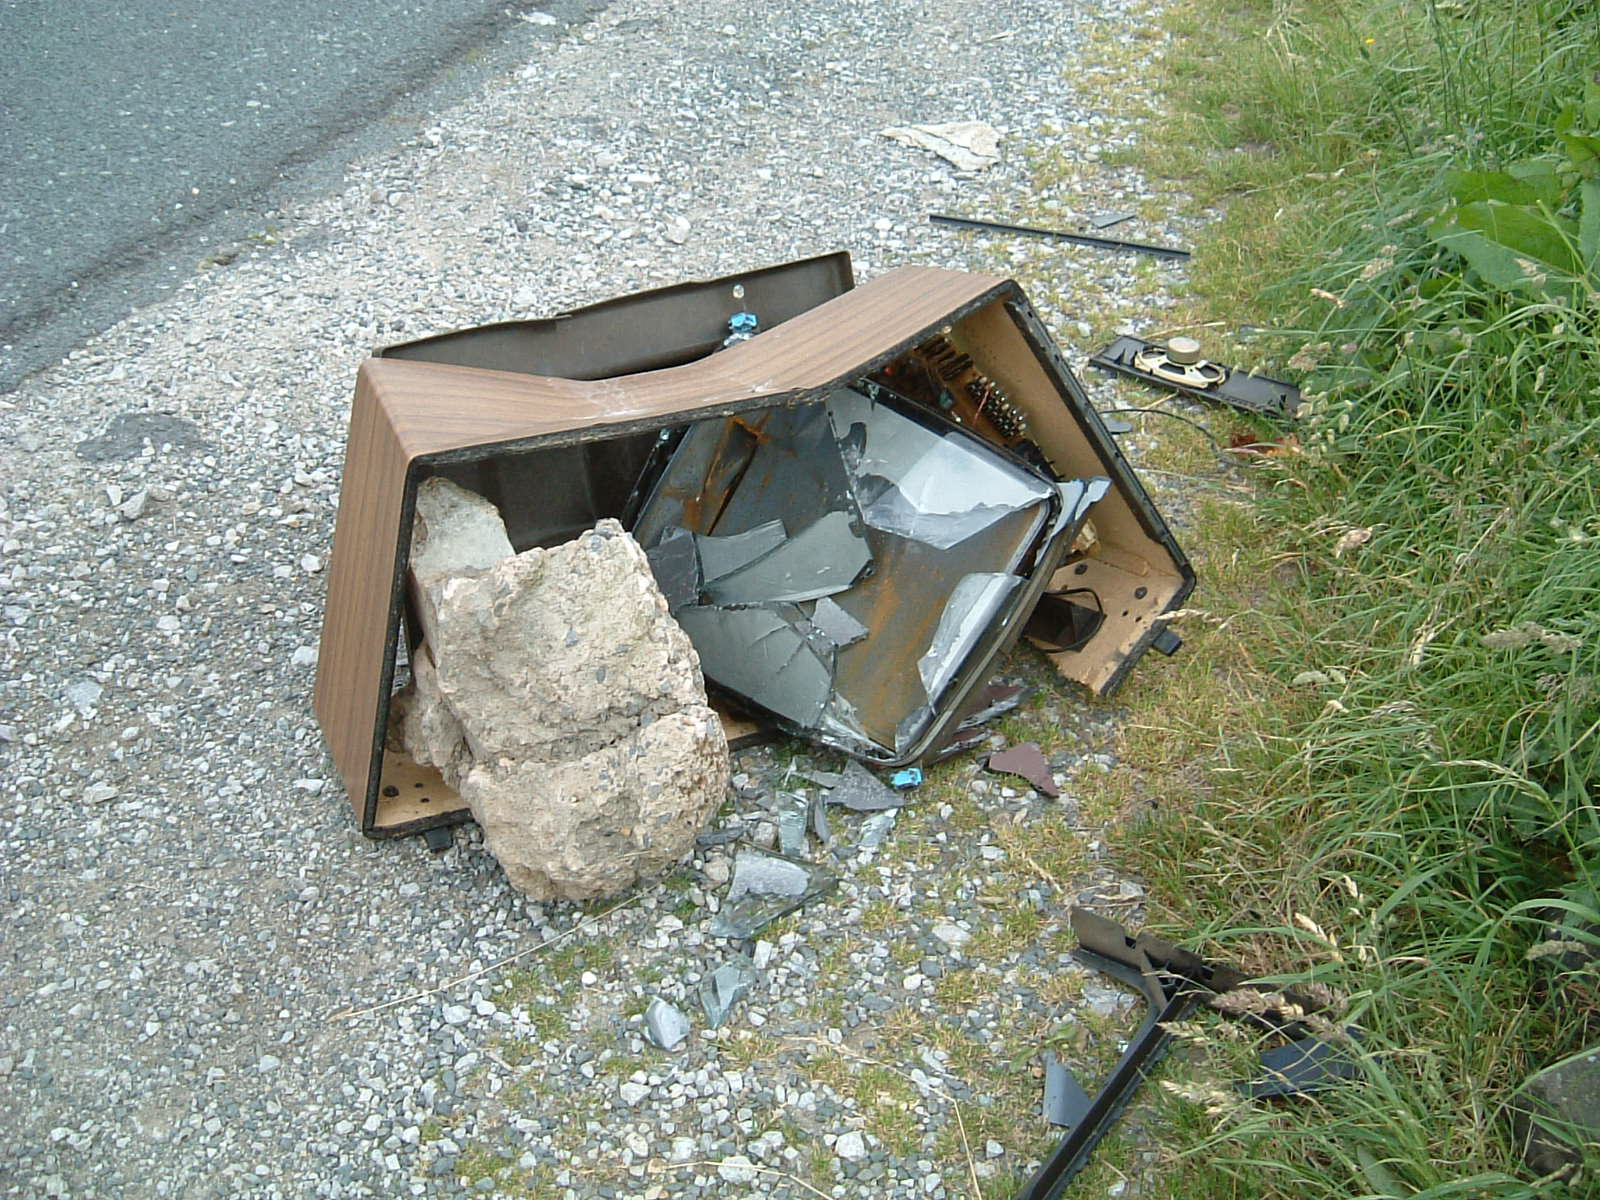 A smashed TV, north of Lothersdale